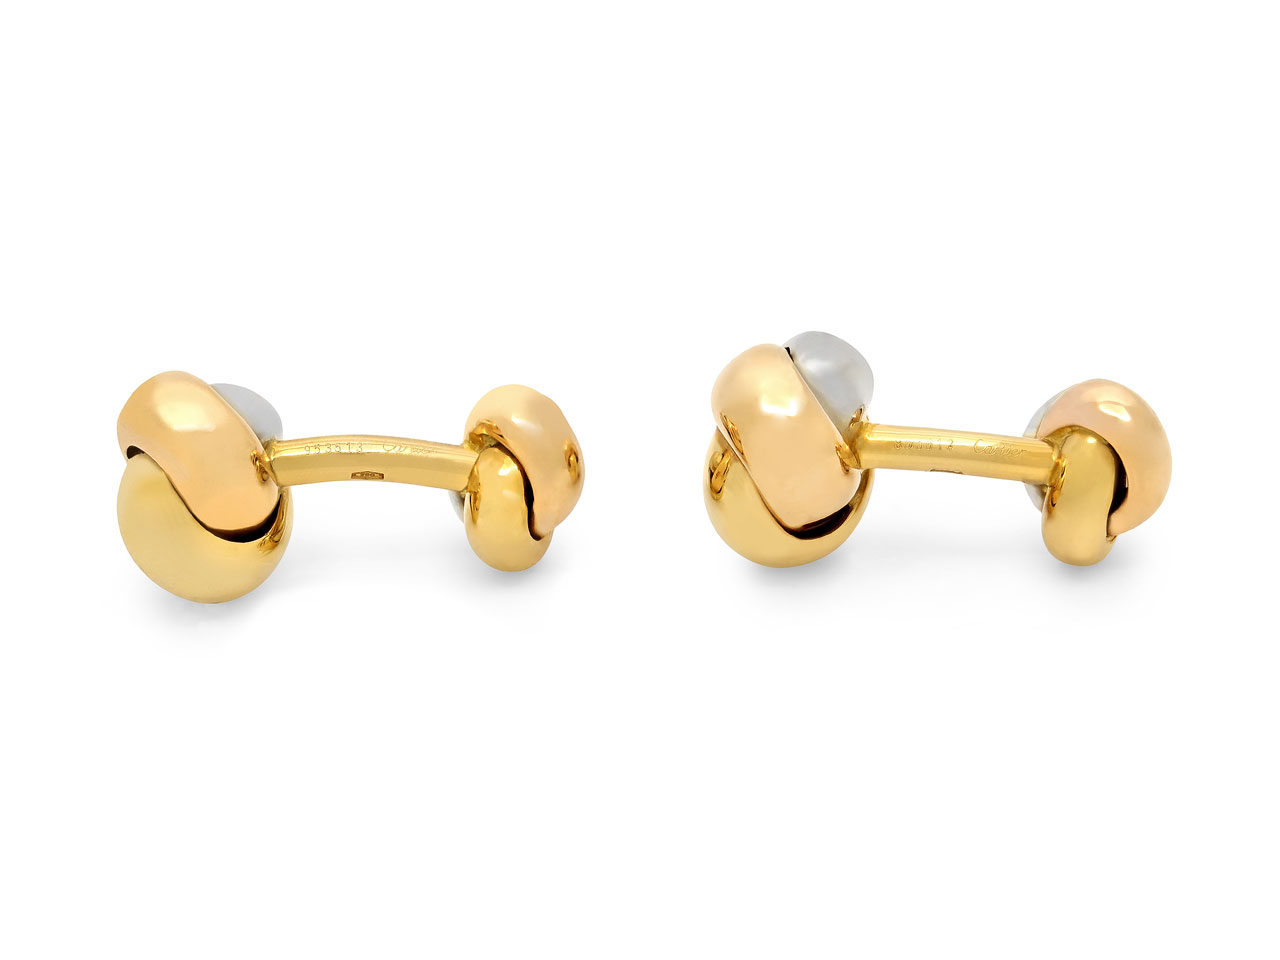 Cartier 'Trinity' Cufflinks in 18K White, Yellow, and Rose Gold